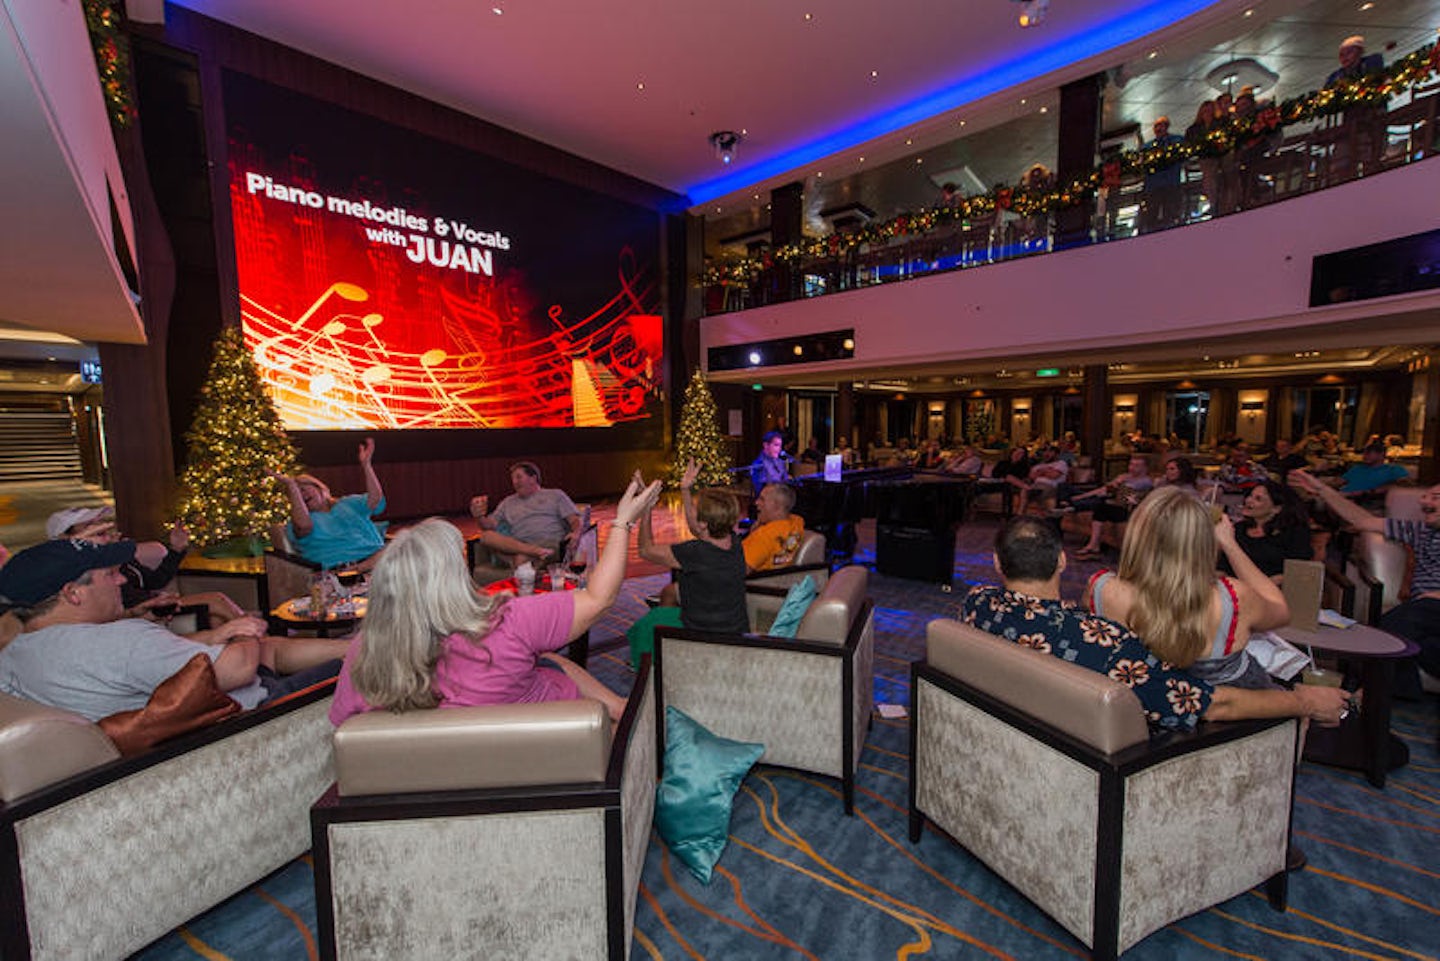 Piano Melodies and Vocals with Juan on Norwegian Escape